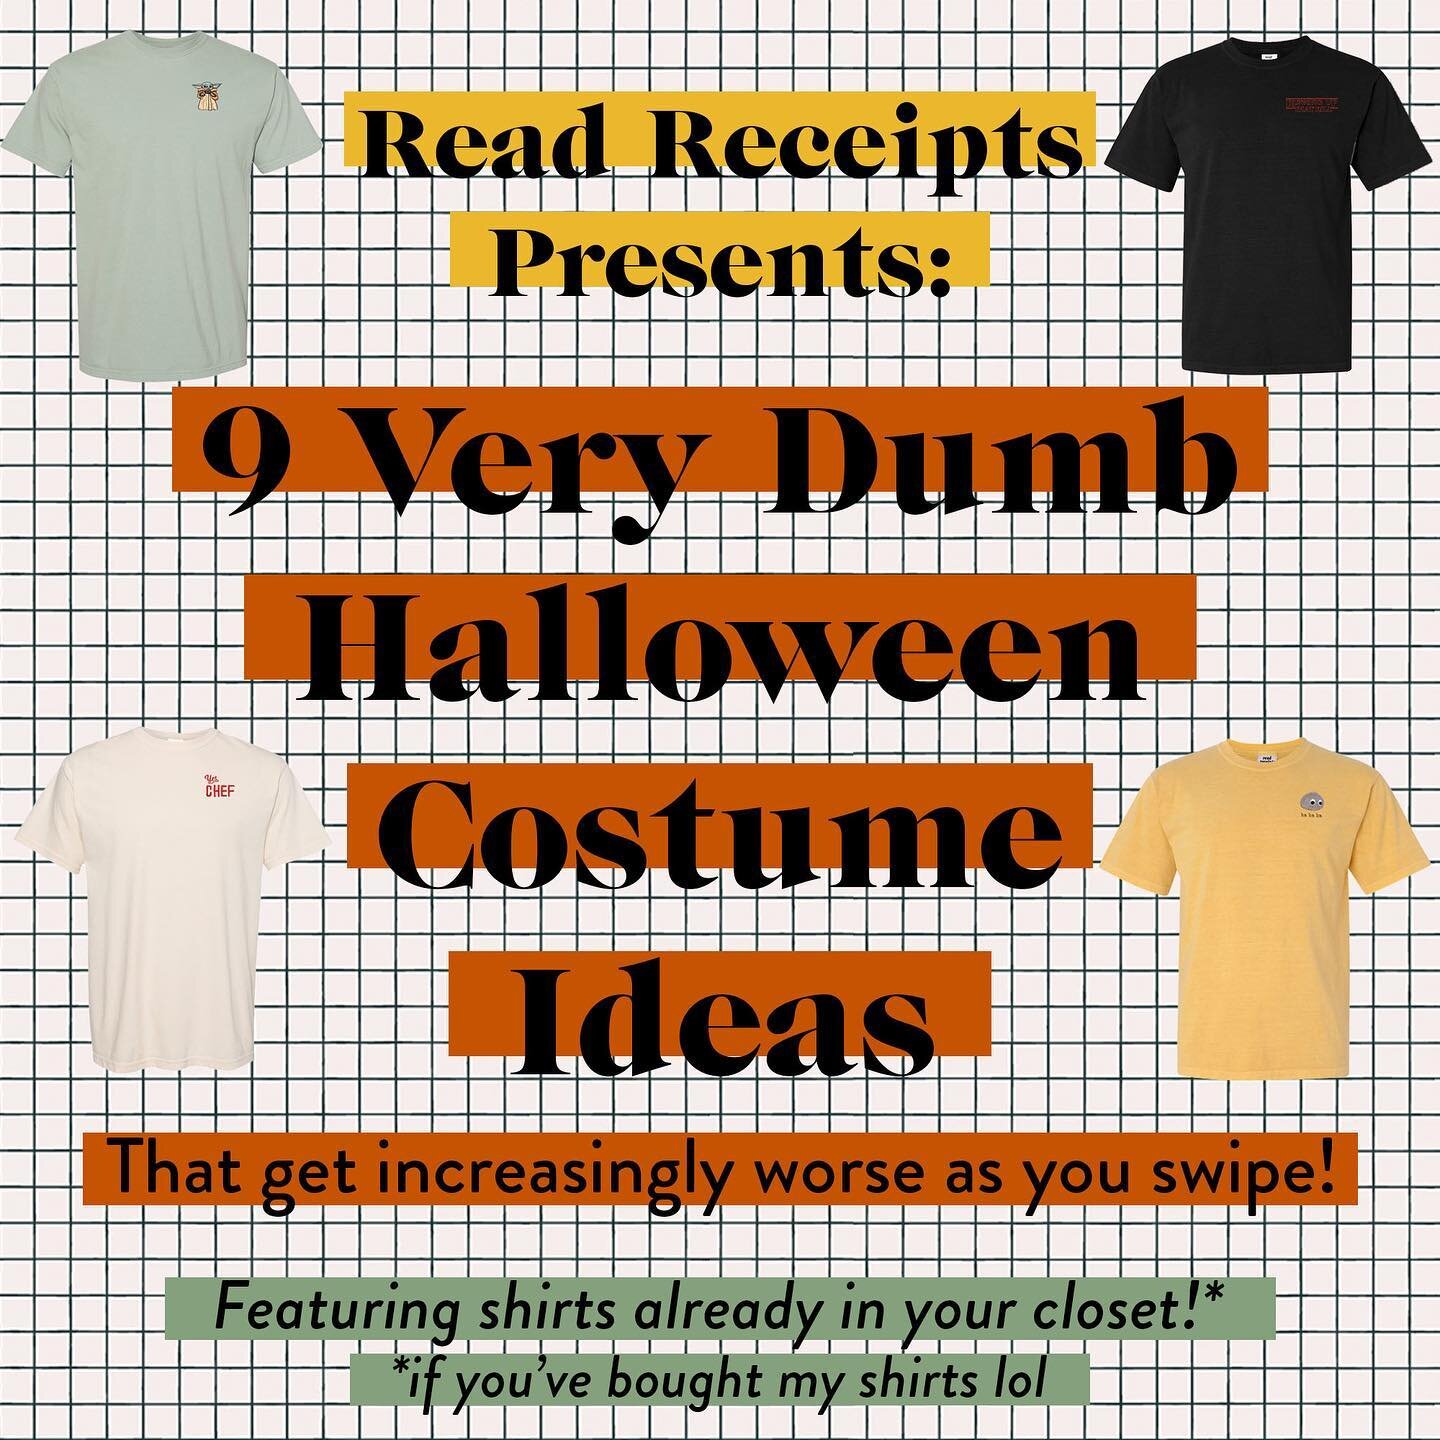 Need a Halloween costume that will make people groan? I GOTCHU! Swipe for 9 costumes based around some of my most popular designs&mdash;meaning that for many of you on here, these are actually real live possible options for you this halloweekend! Bec